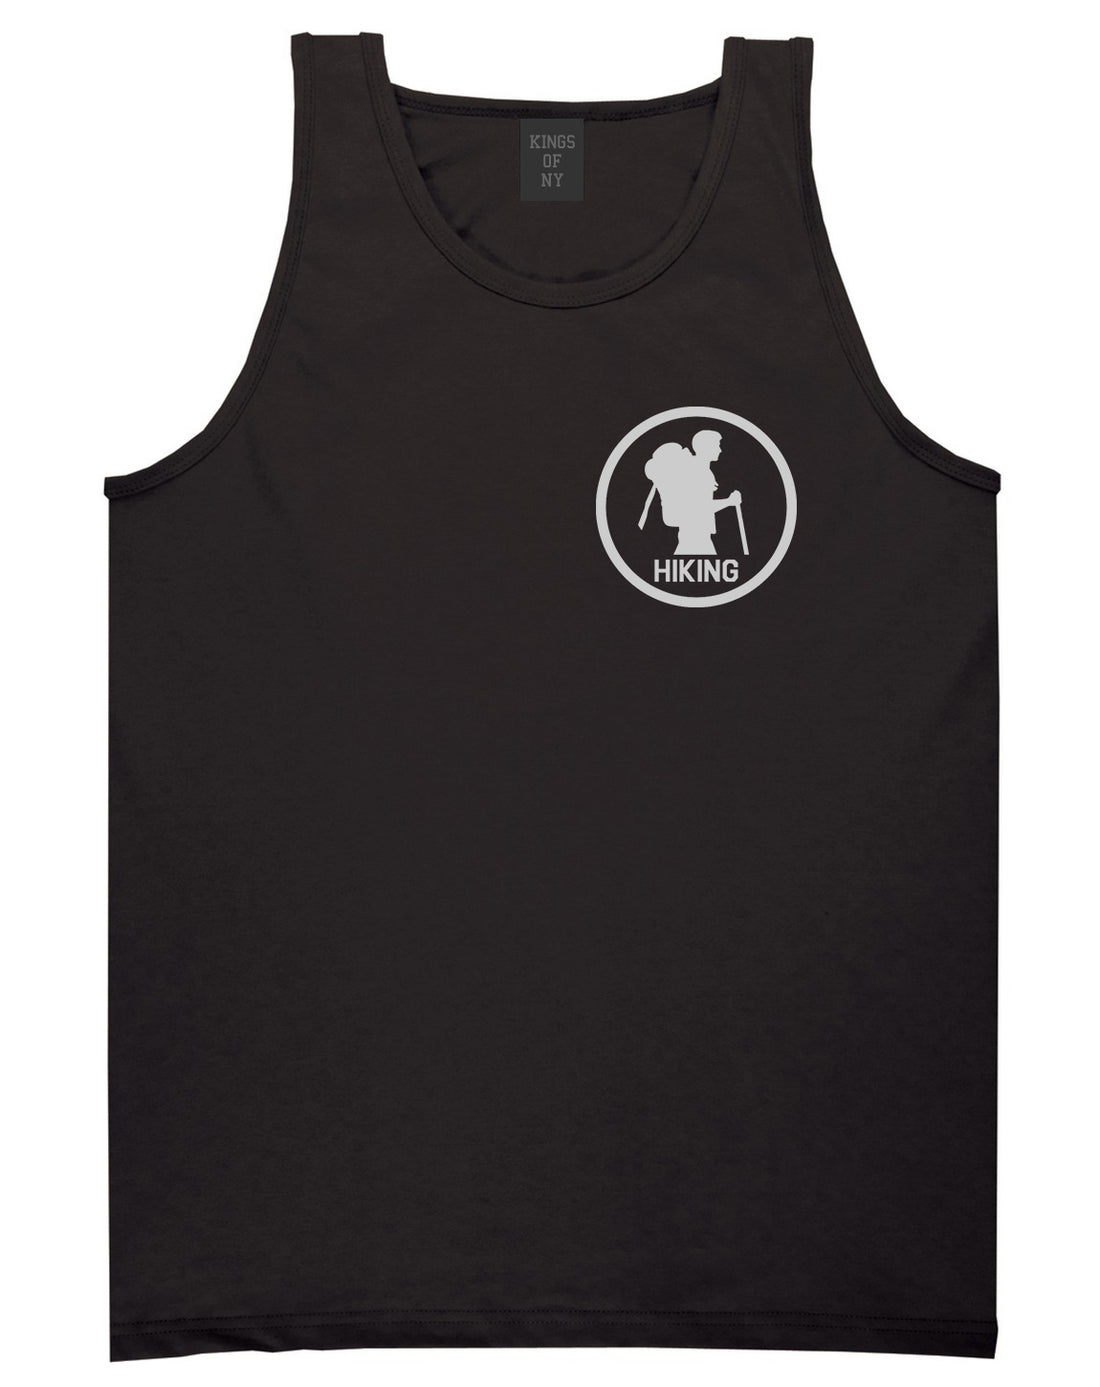 Backpacking Outdoor Hiking Chest Black Tank Top Shirt by Kings Of NY